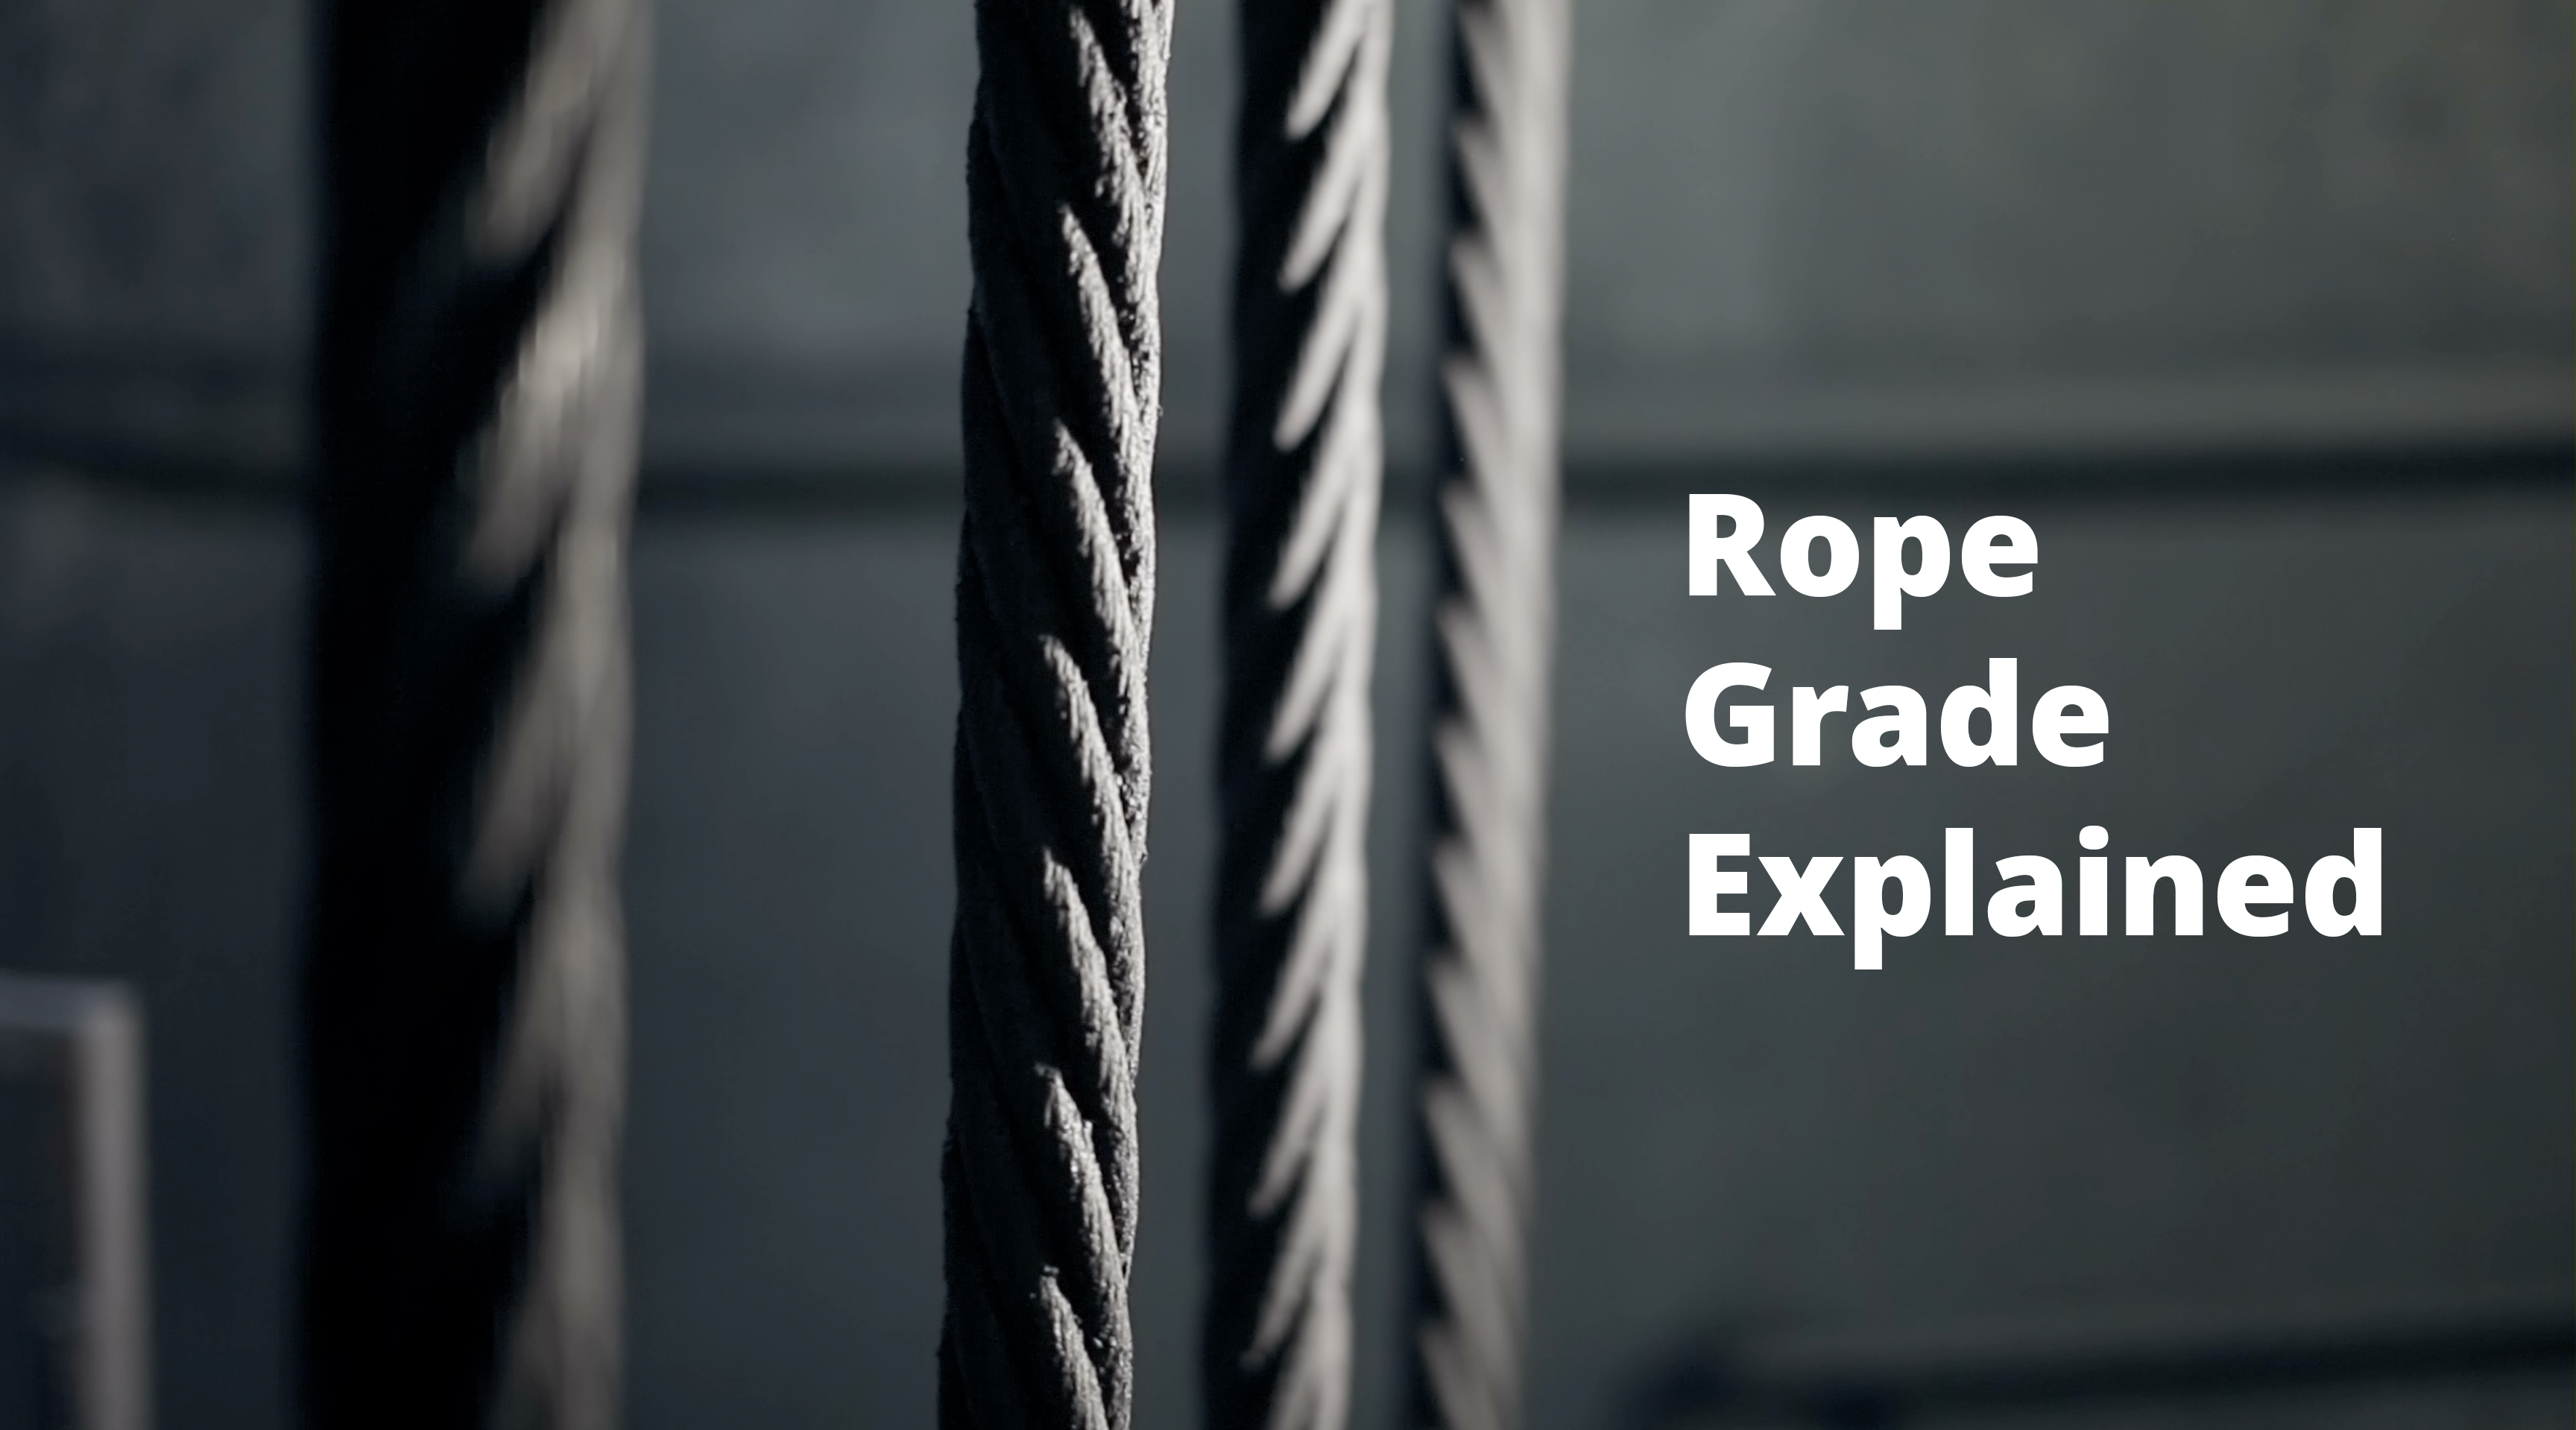 Thumbnail image for the podcast "Rope grade explained" featuring an image of steel wire rope & text containing the podcast title.